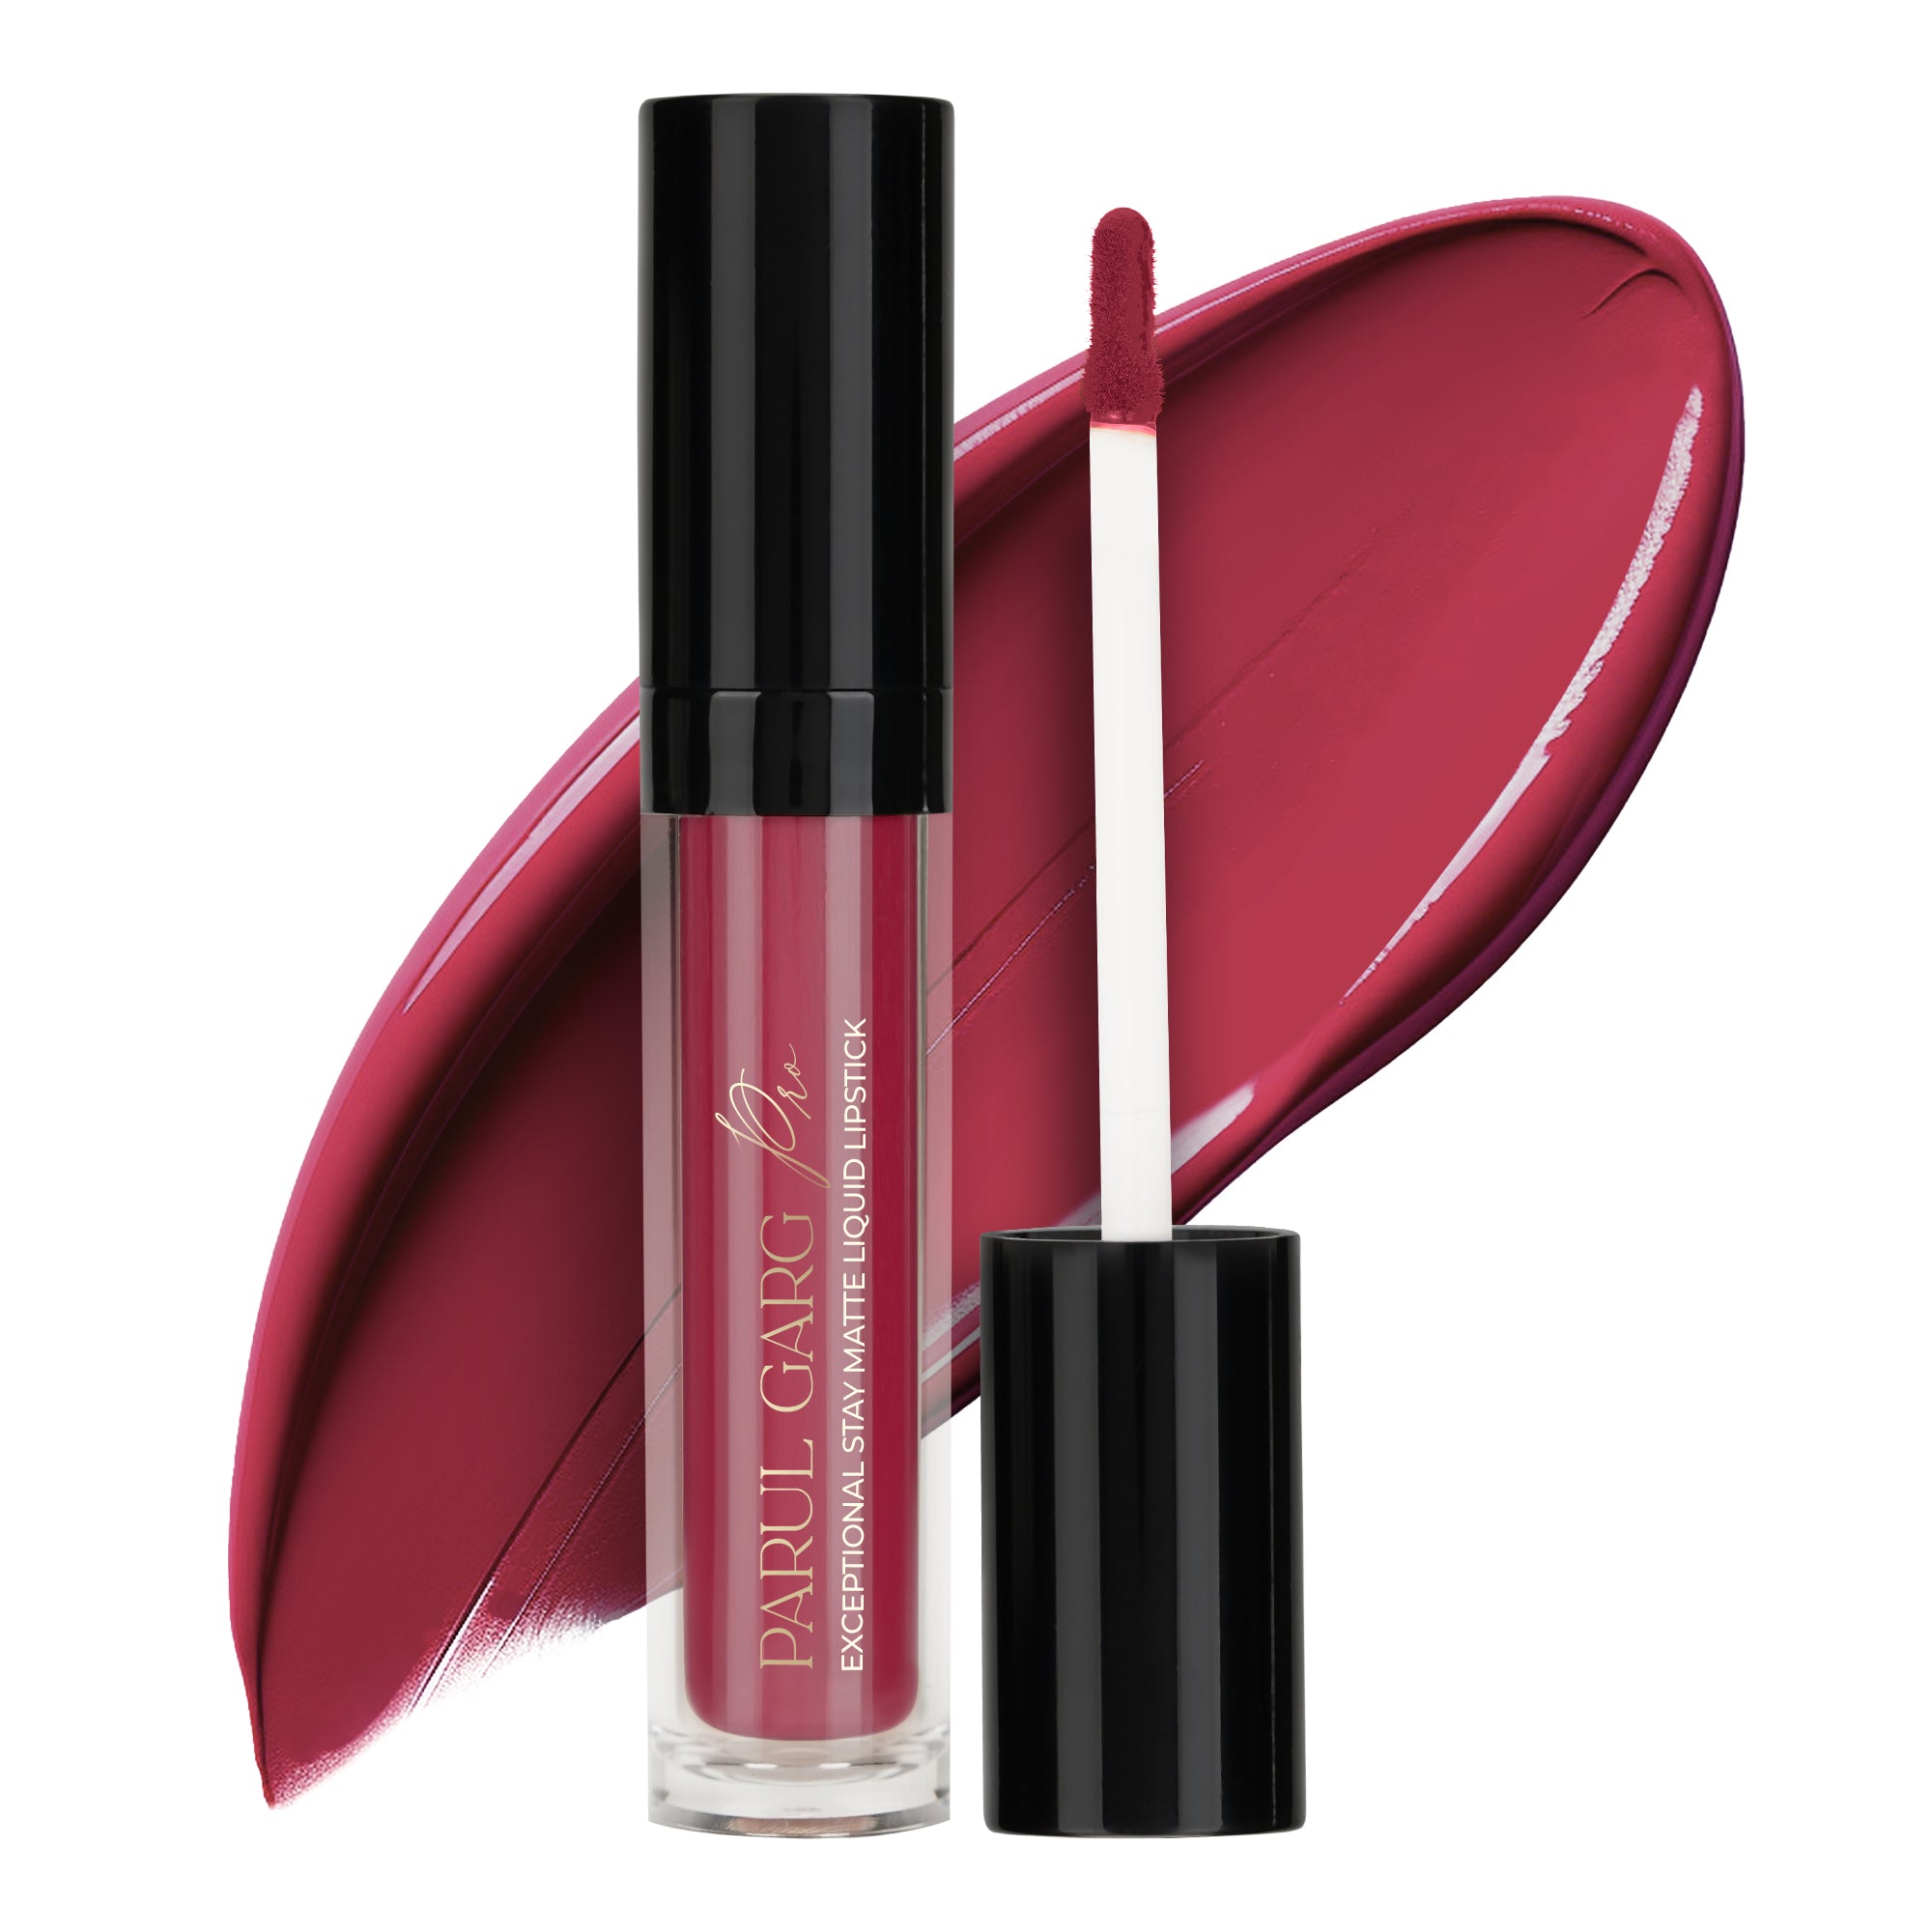 Exceptional Stay Matte Liquid Lipstick  Shade: Orchid 11